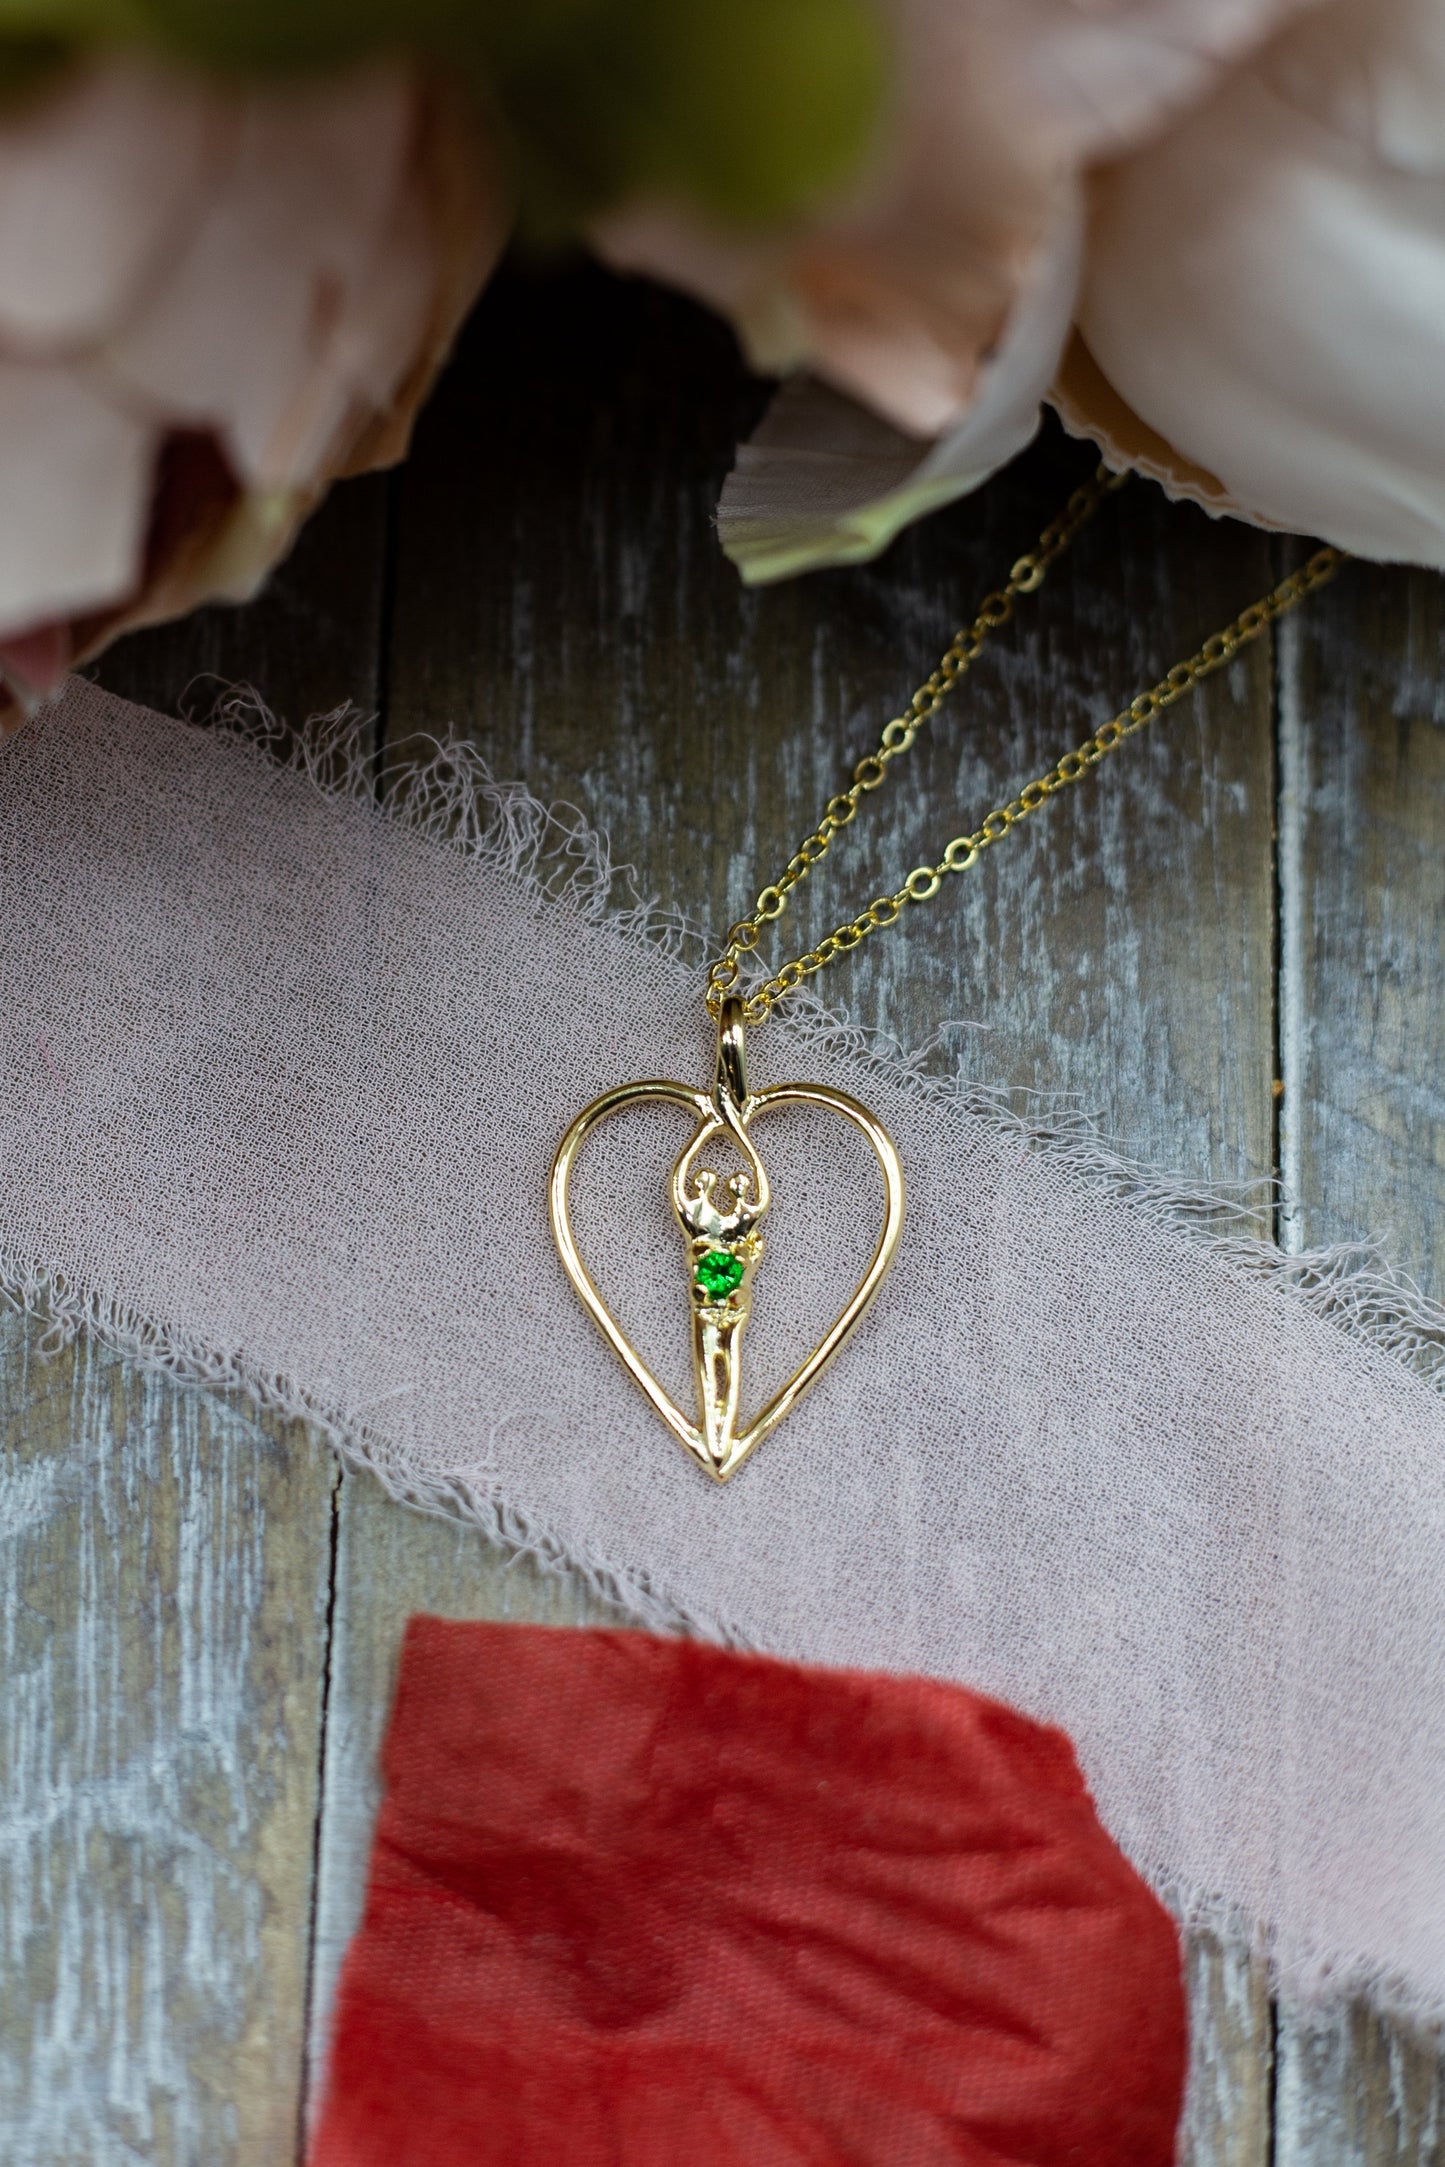 Medium Soulmate Heart Necklace, .925 Genuine Sterling Silver with 14kt. Gold Overlay, 18" Chain, Charm 1 ¼" by ¾", Emerald Cubic Zirconia